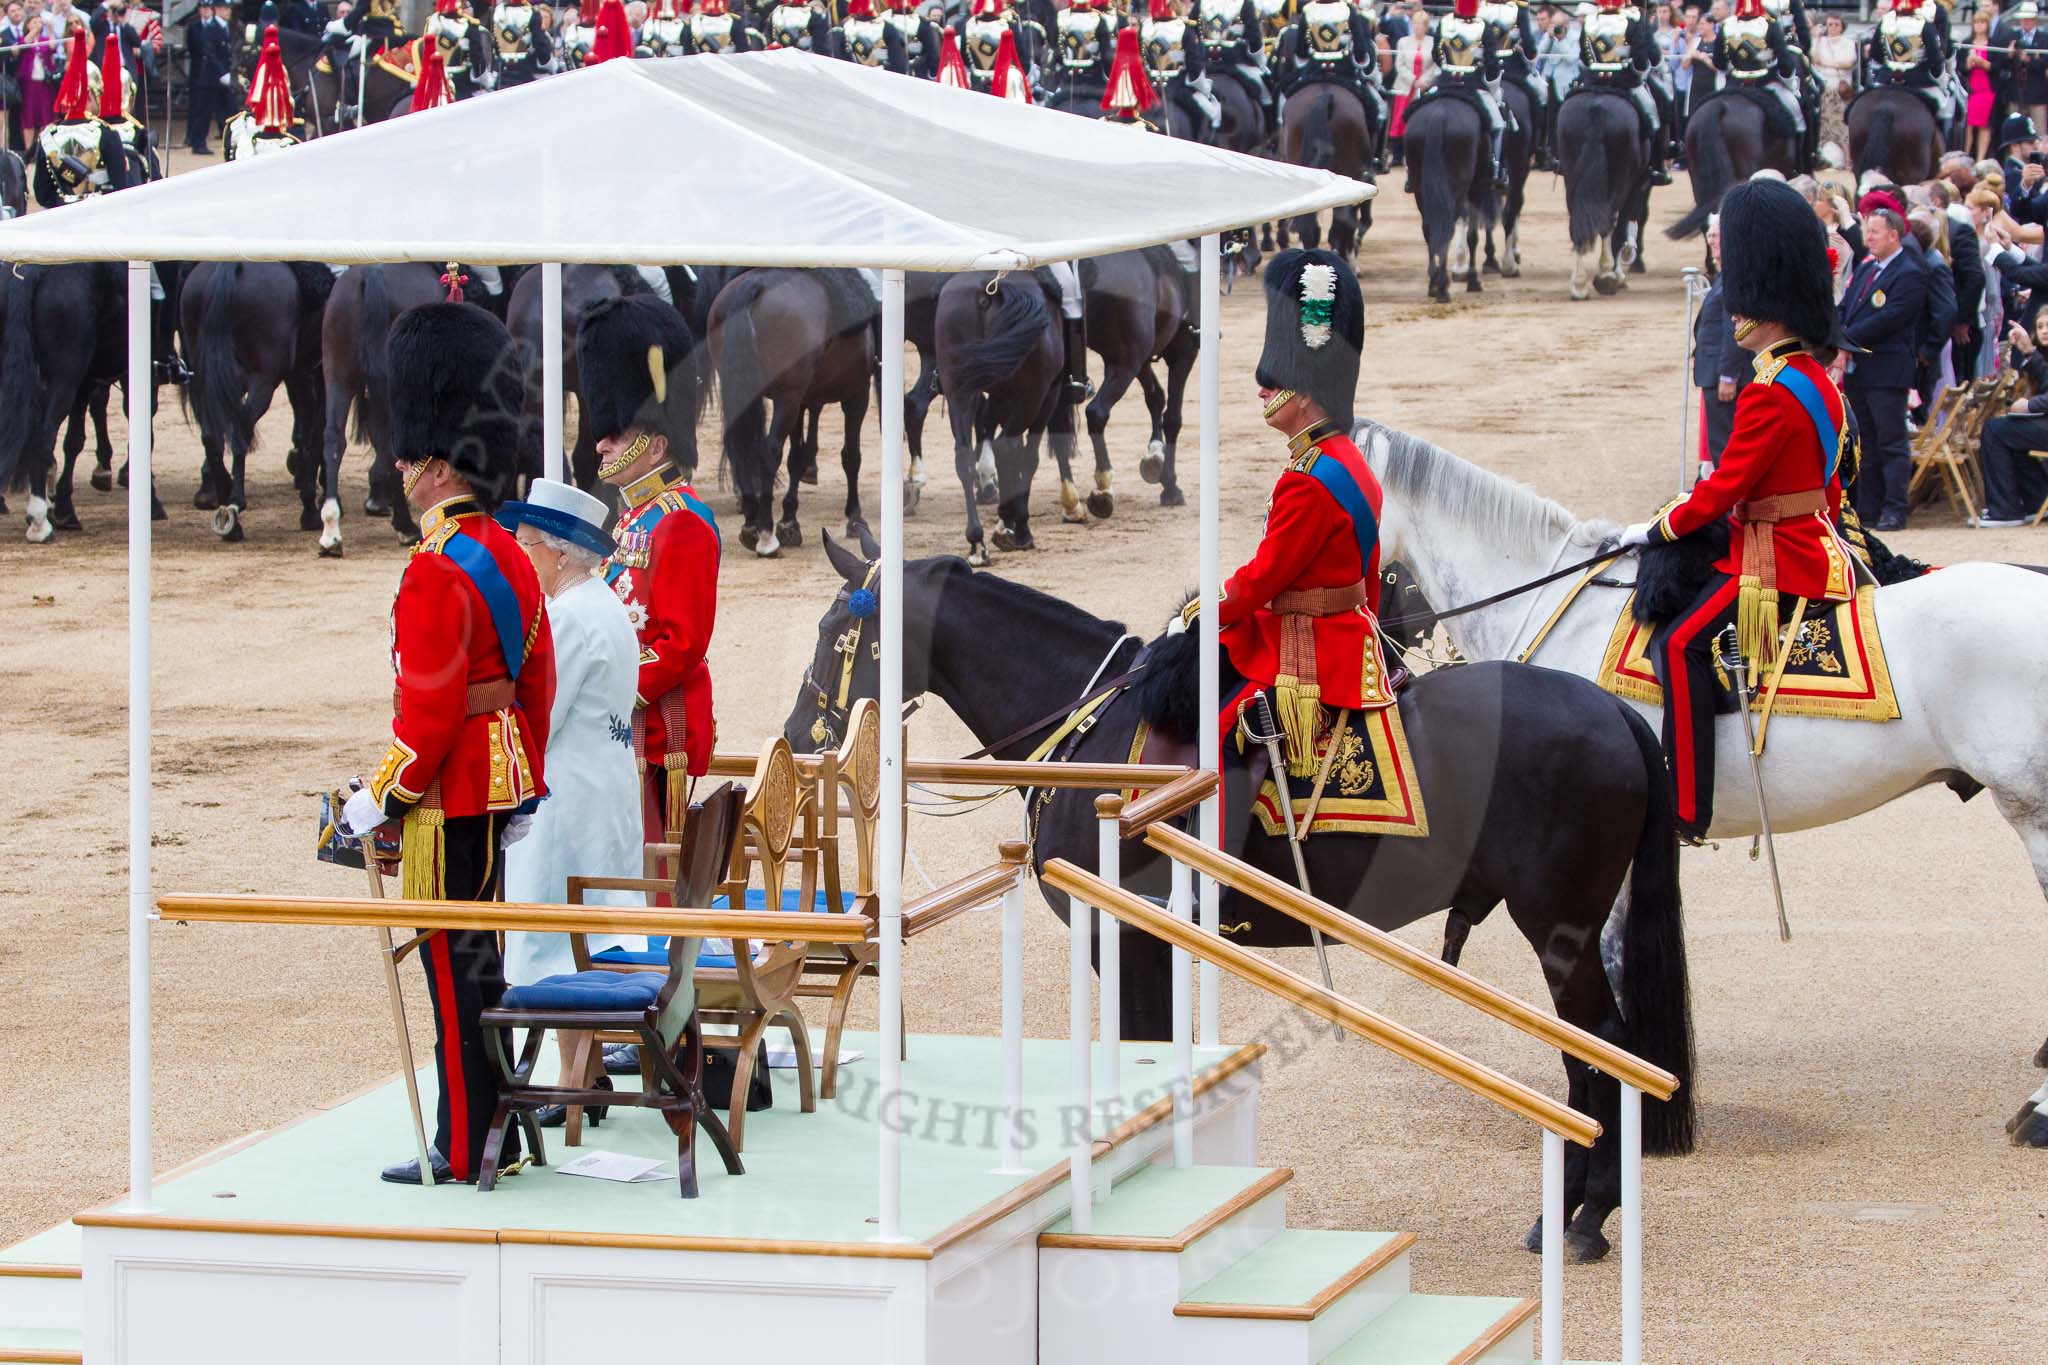 Trooping the Colour 2014.
Horse Guards Parade, Westminster,
London SW1A,

United Kingdom,
on 14 June 2014 at 11:58, image #787